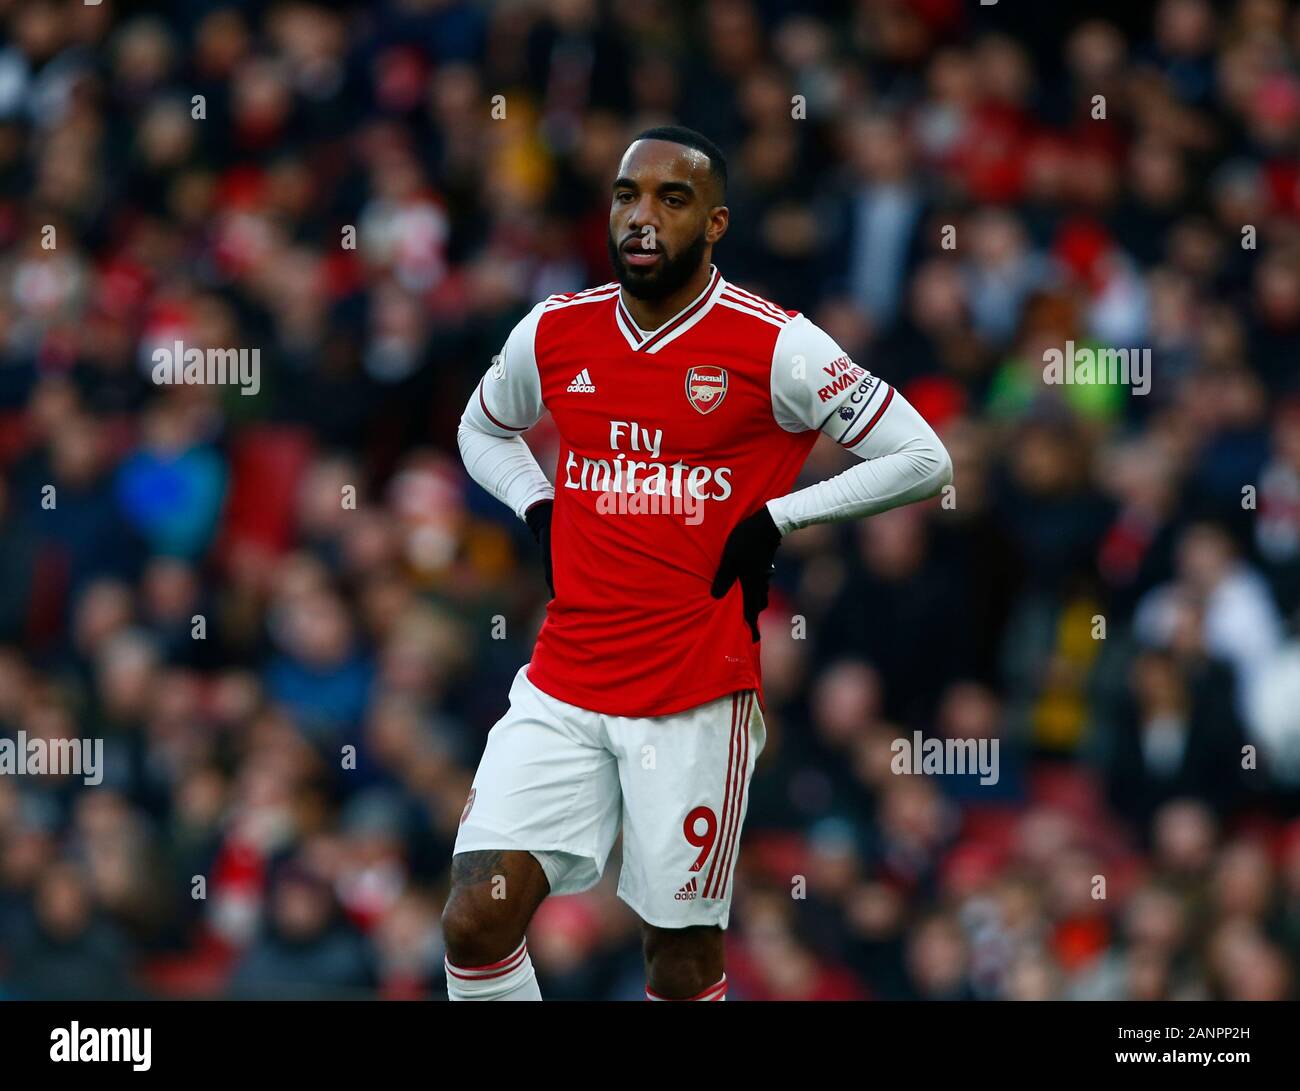 Alexandre Lacazette of Arsenal during English Premier League match between Arsenal and Sheffield United on January 18 2020 at The Emirates Stadium, London, England. Photo by AFS/Espa-Images) Stock Photo